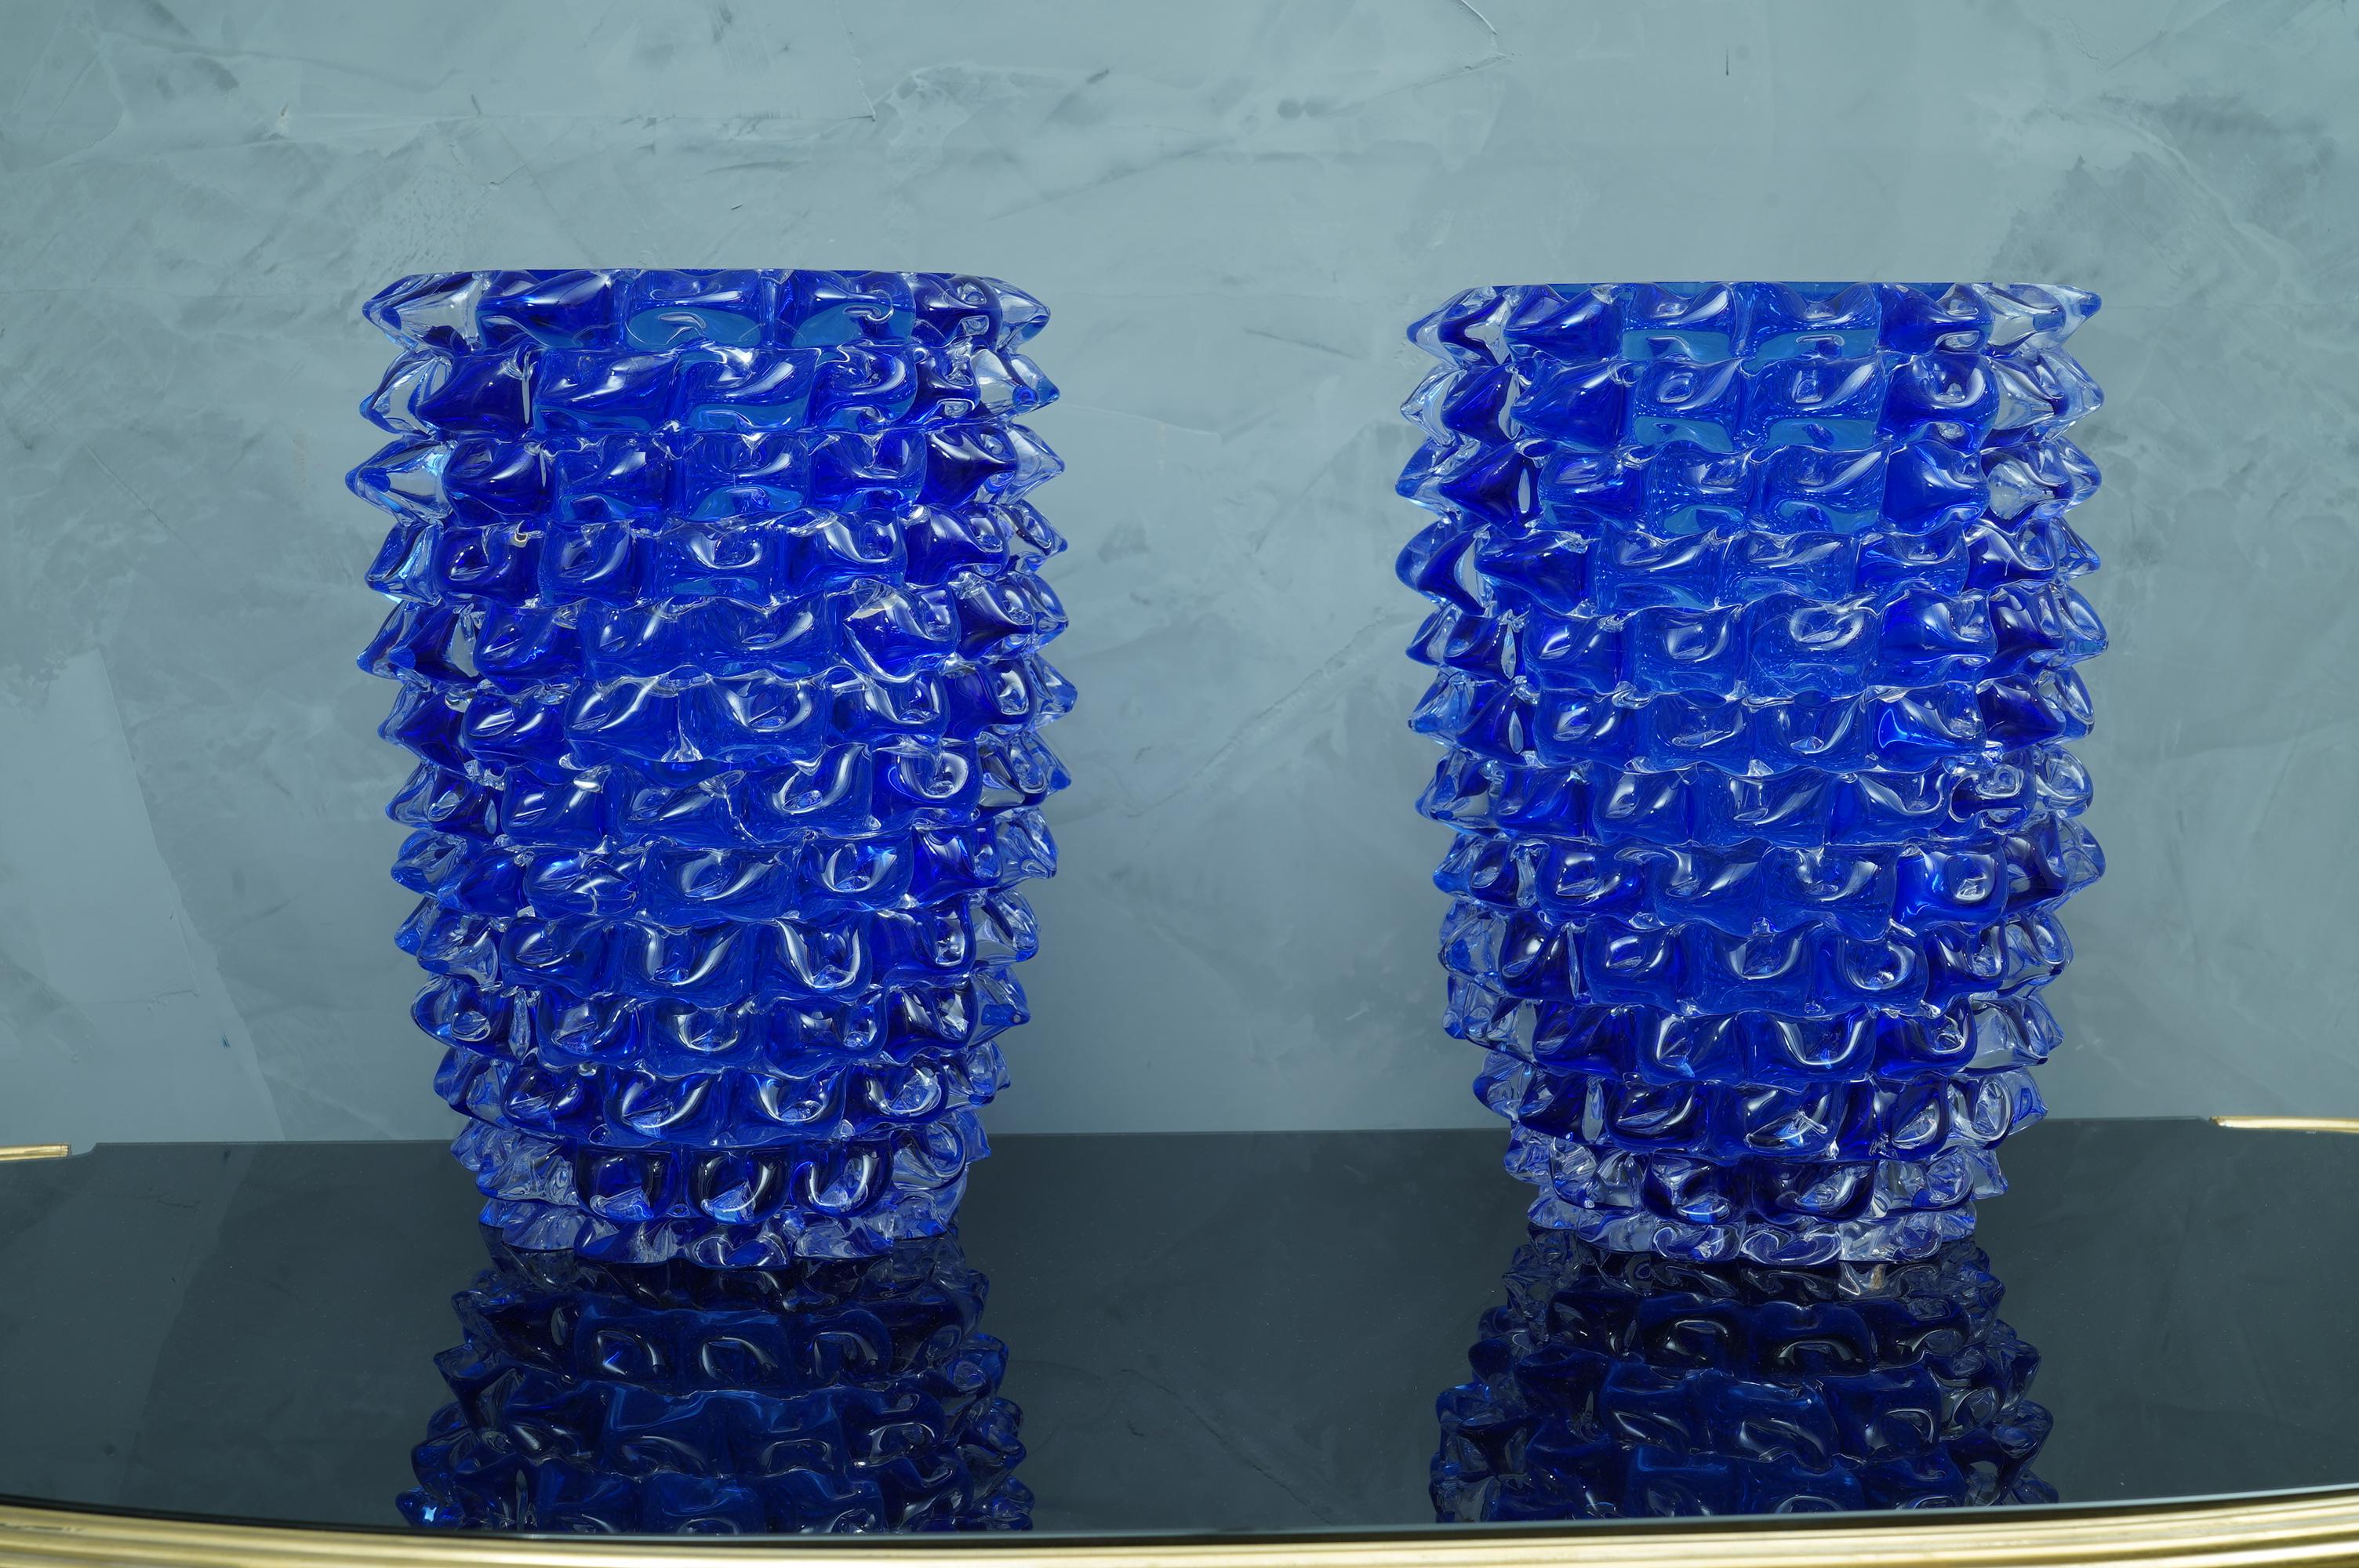 Fantastic vase from the Murano glassworks, both for its special processing and for its color, in fact the vase is blue.

Murano vase, with a special workmanship all around. Vase of round shape, with a particular manual processing called 